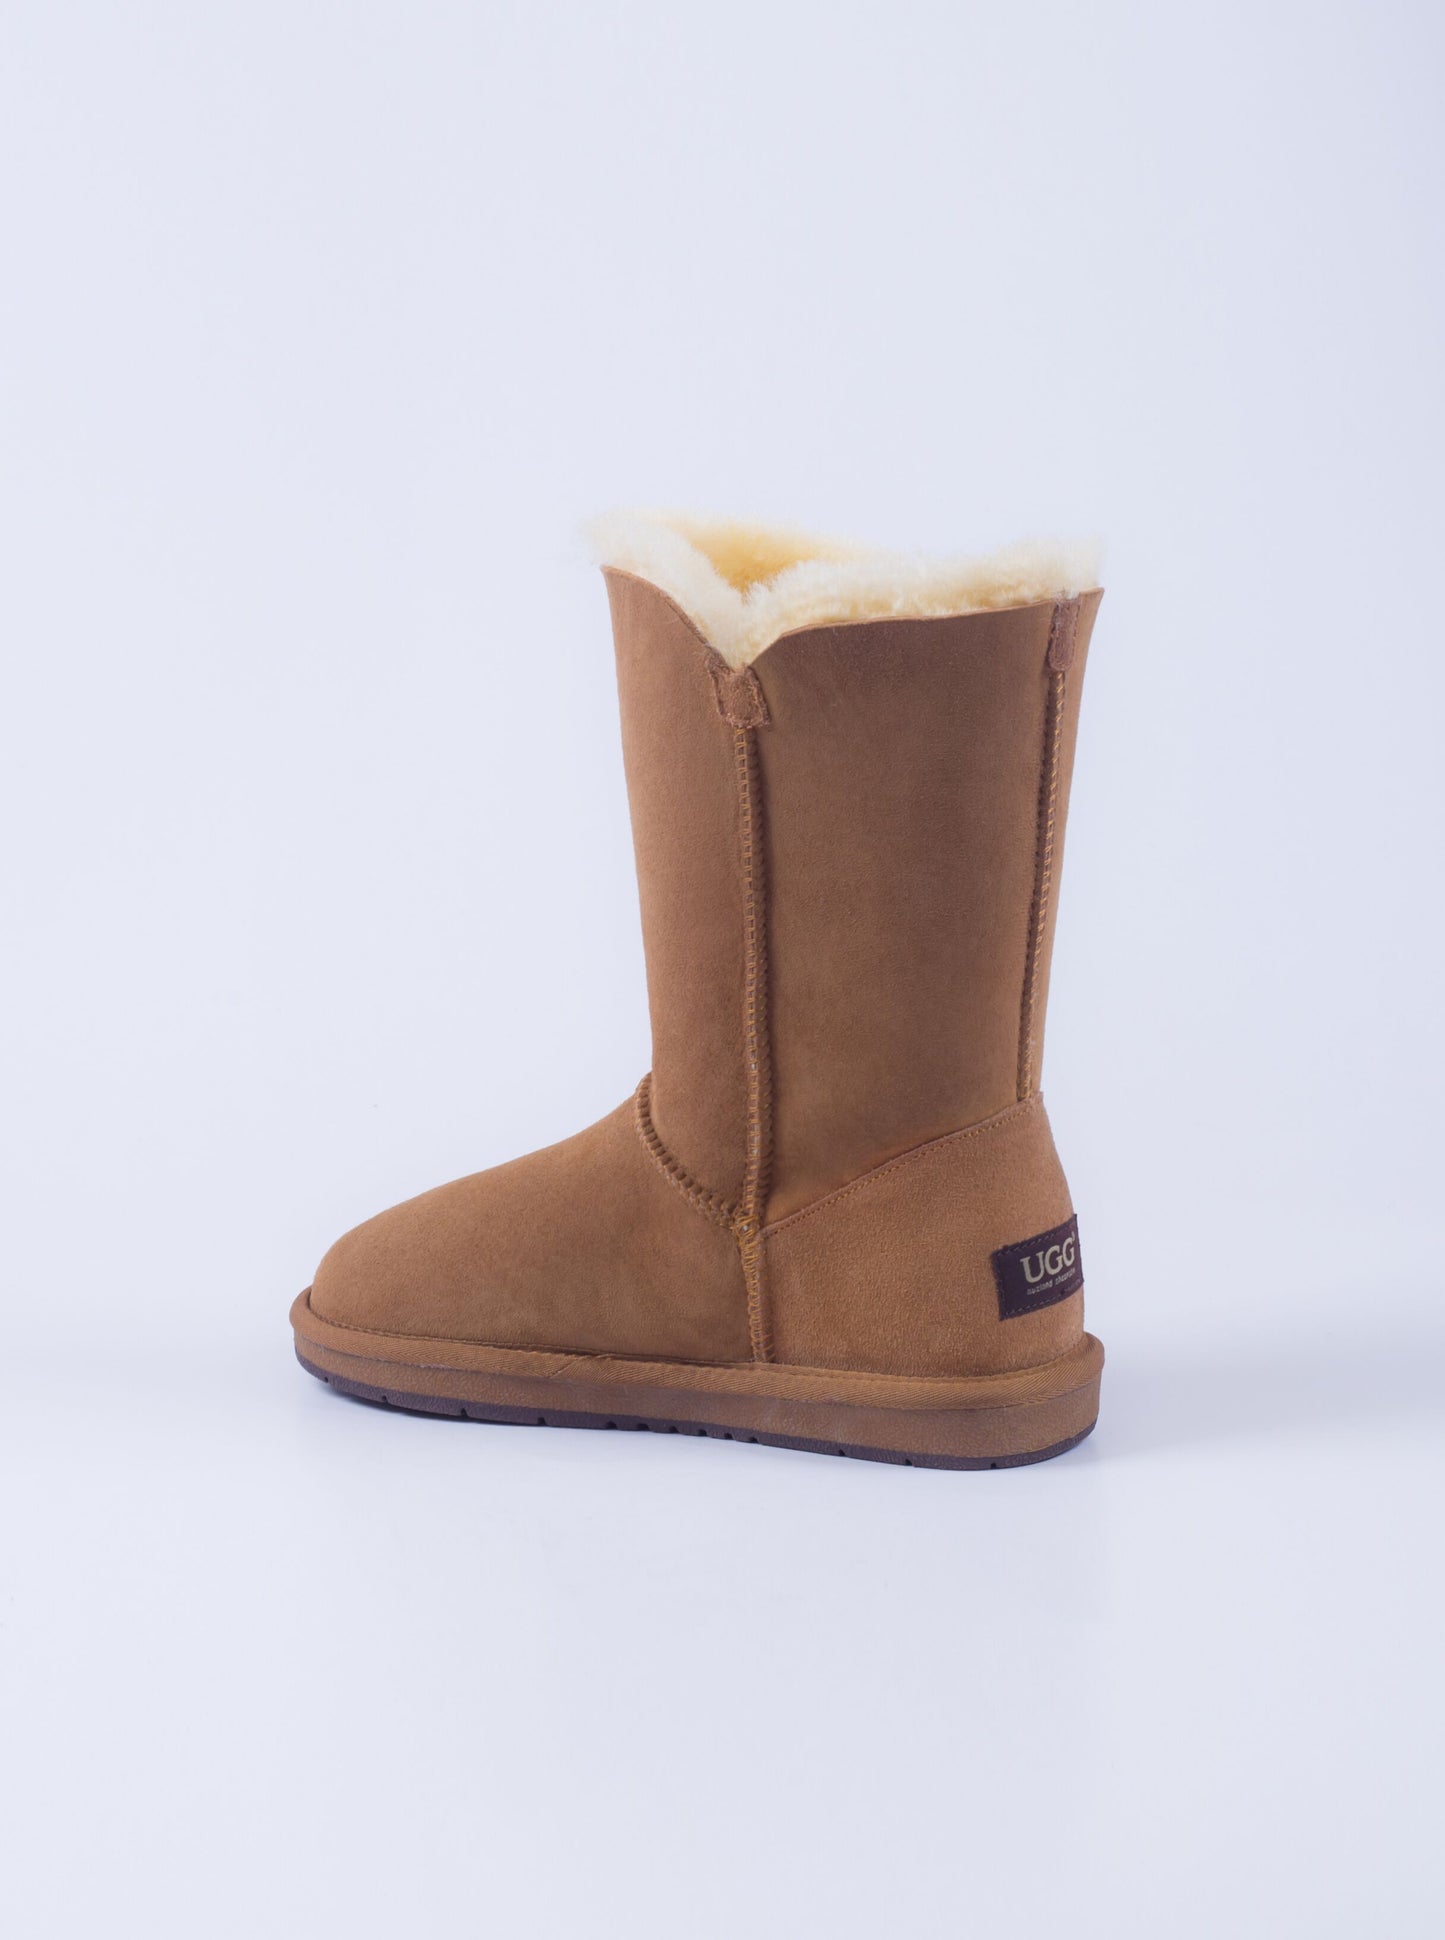 Classic 2 button Classic women's ugg boots